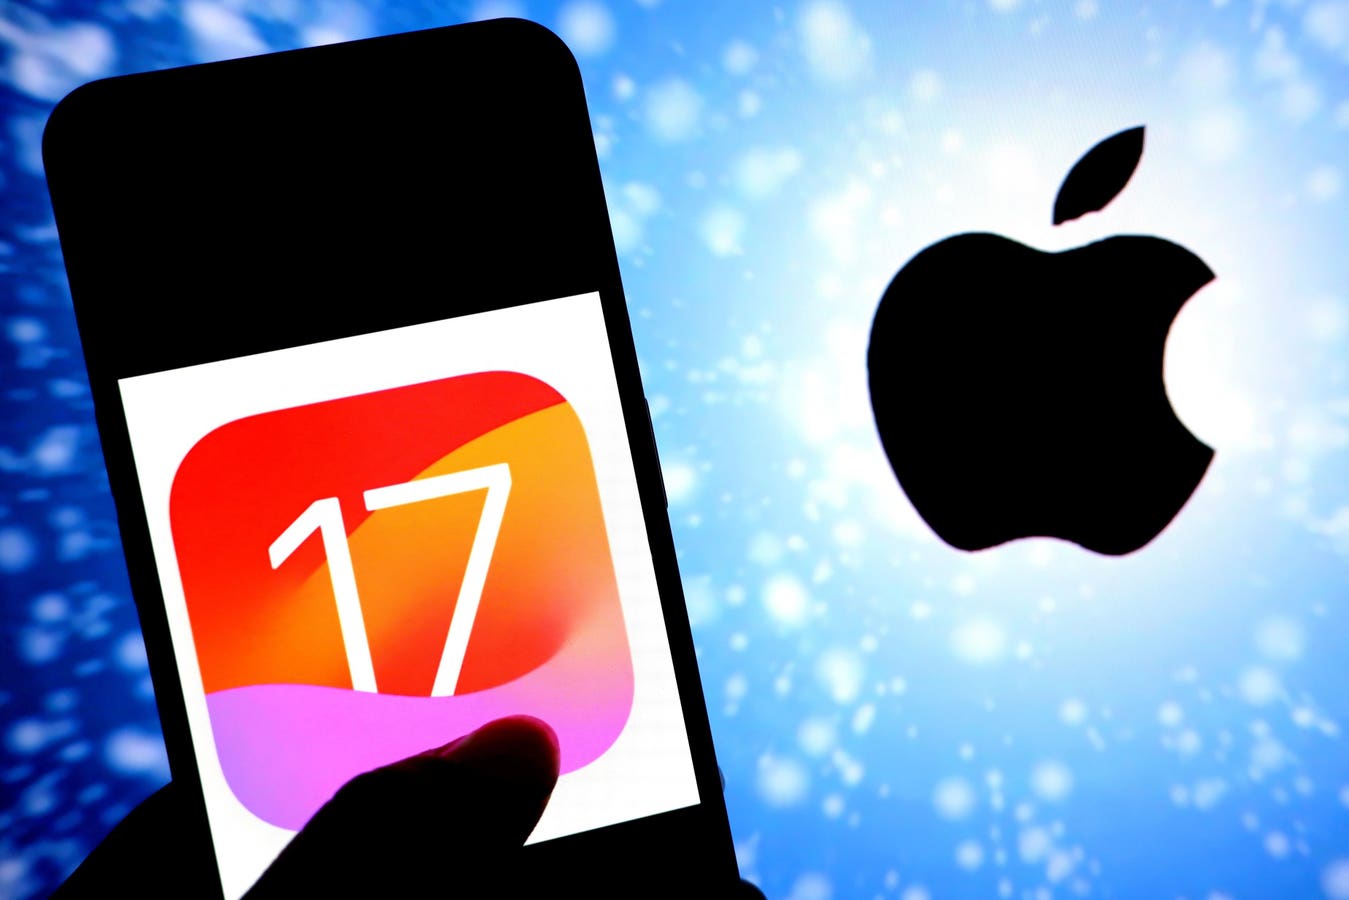 iOS 17.5: Major New iPhone Update Reveals Cutting-Edge Advances Coming Soon